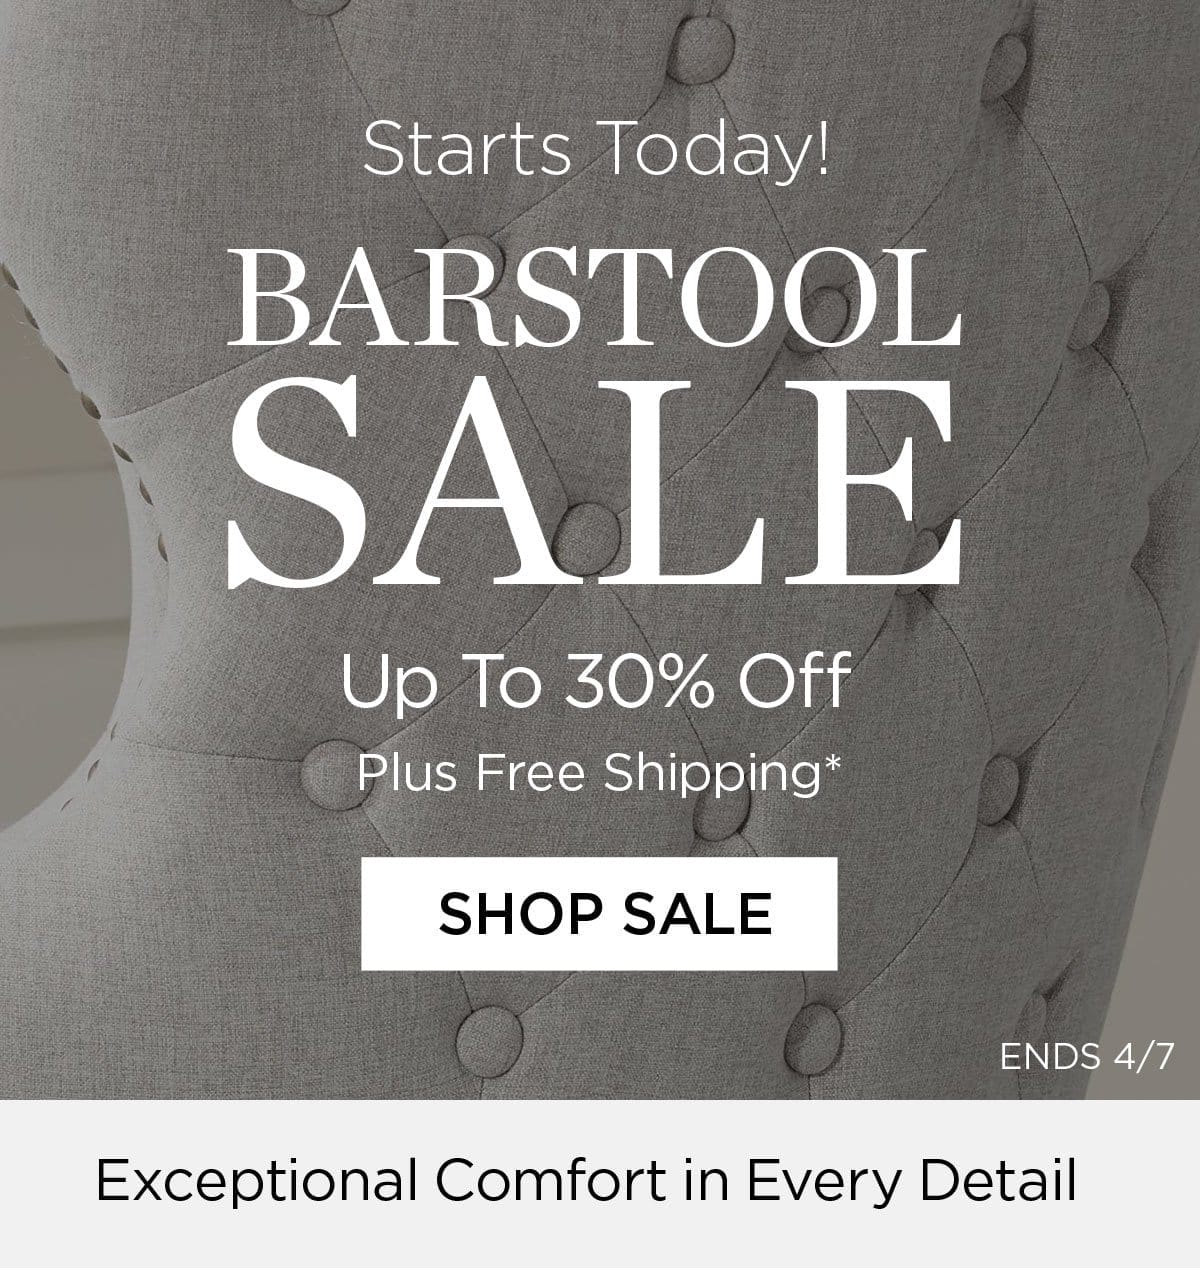 Starts Today! Barstool Sale - Up to 30% Off Plus Free Shipping* Shop Sale - Ends 4/7 - Exceptional Comfort in Every Detail